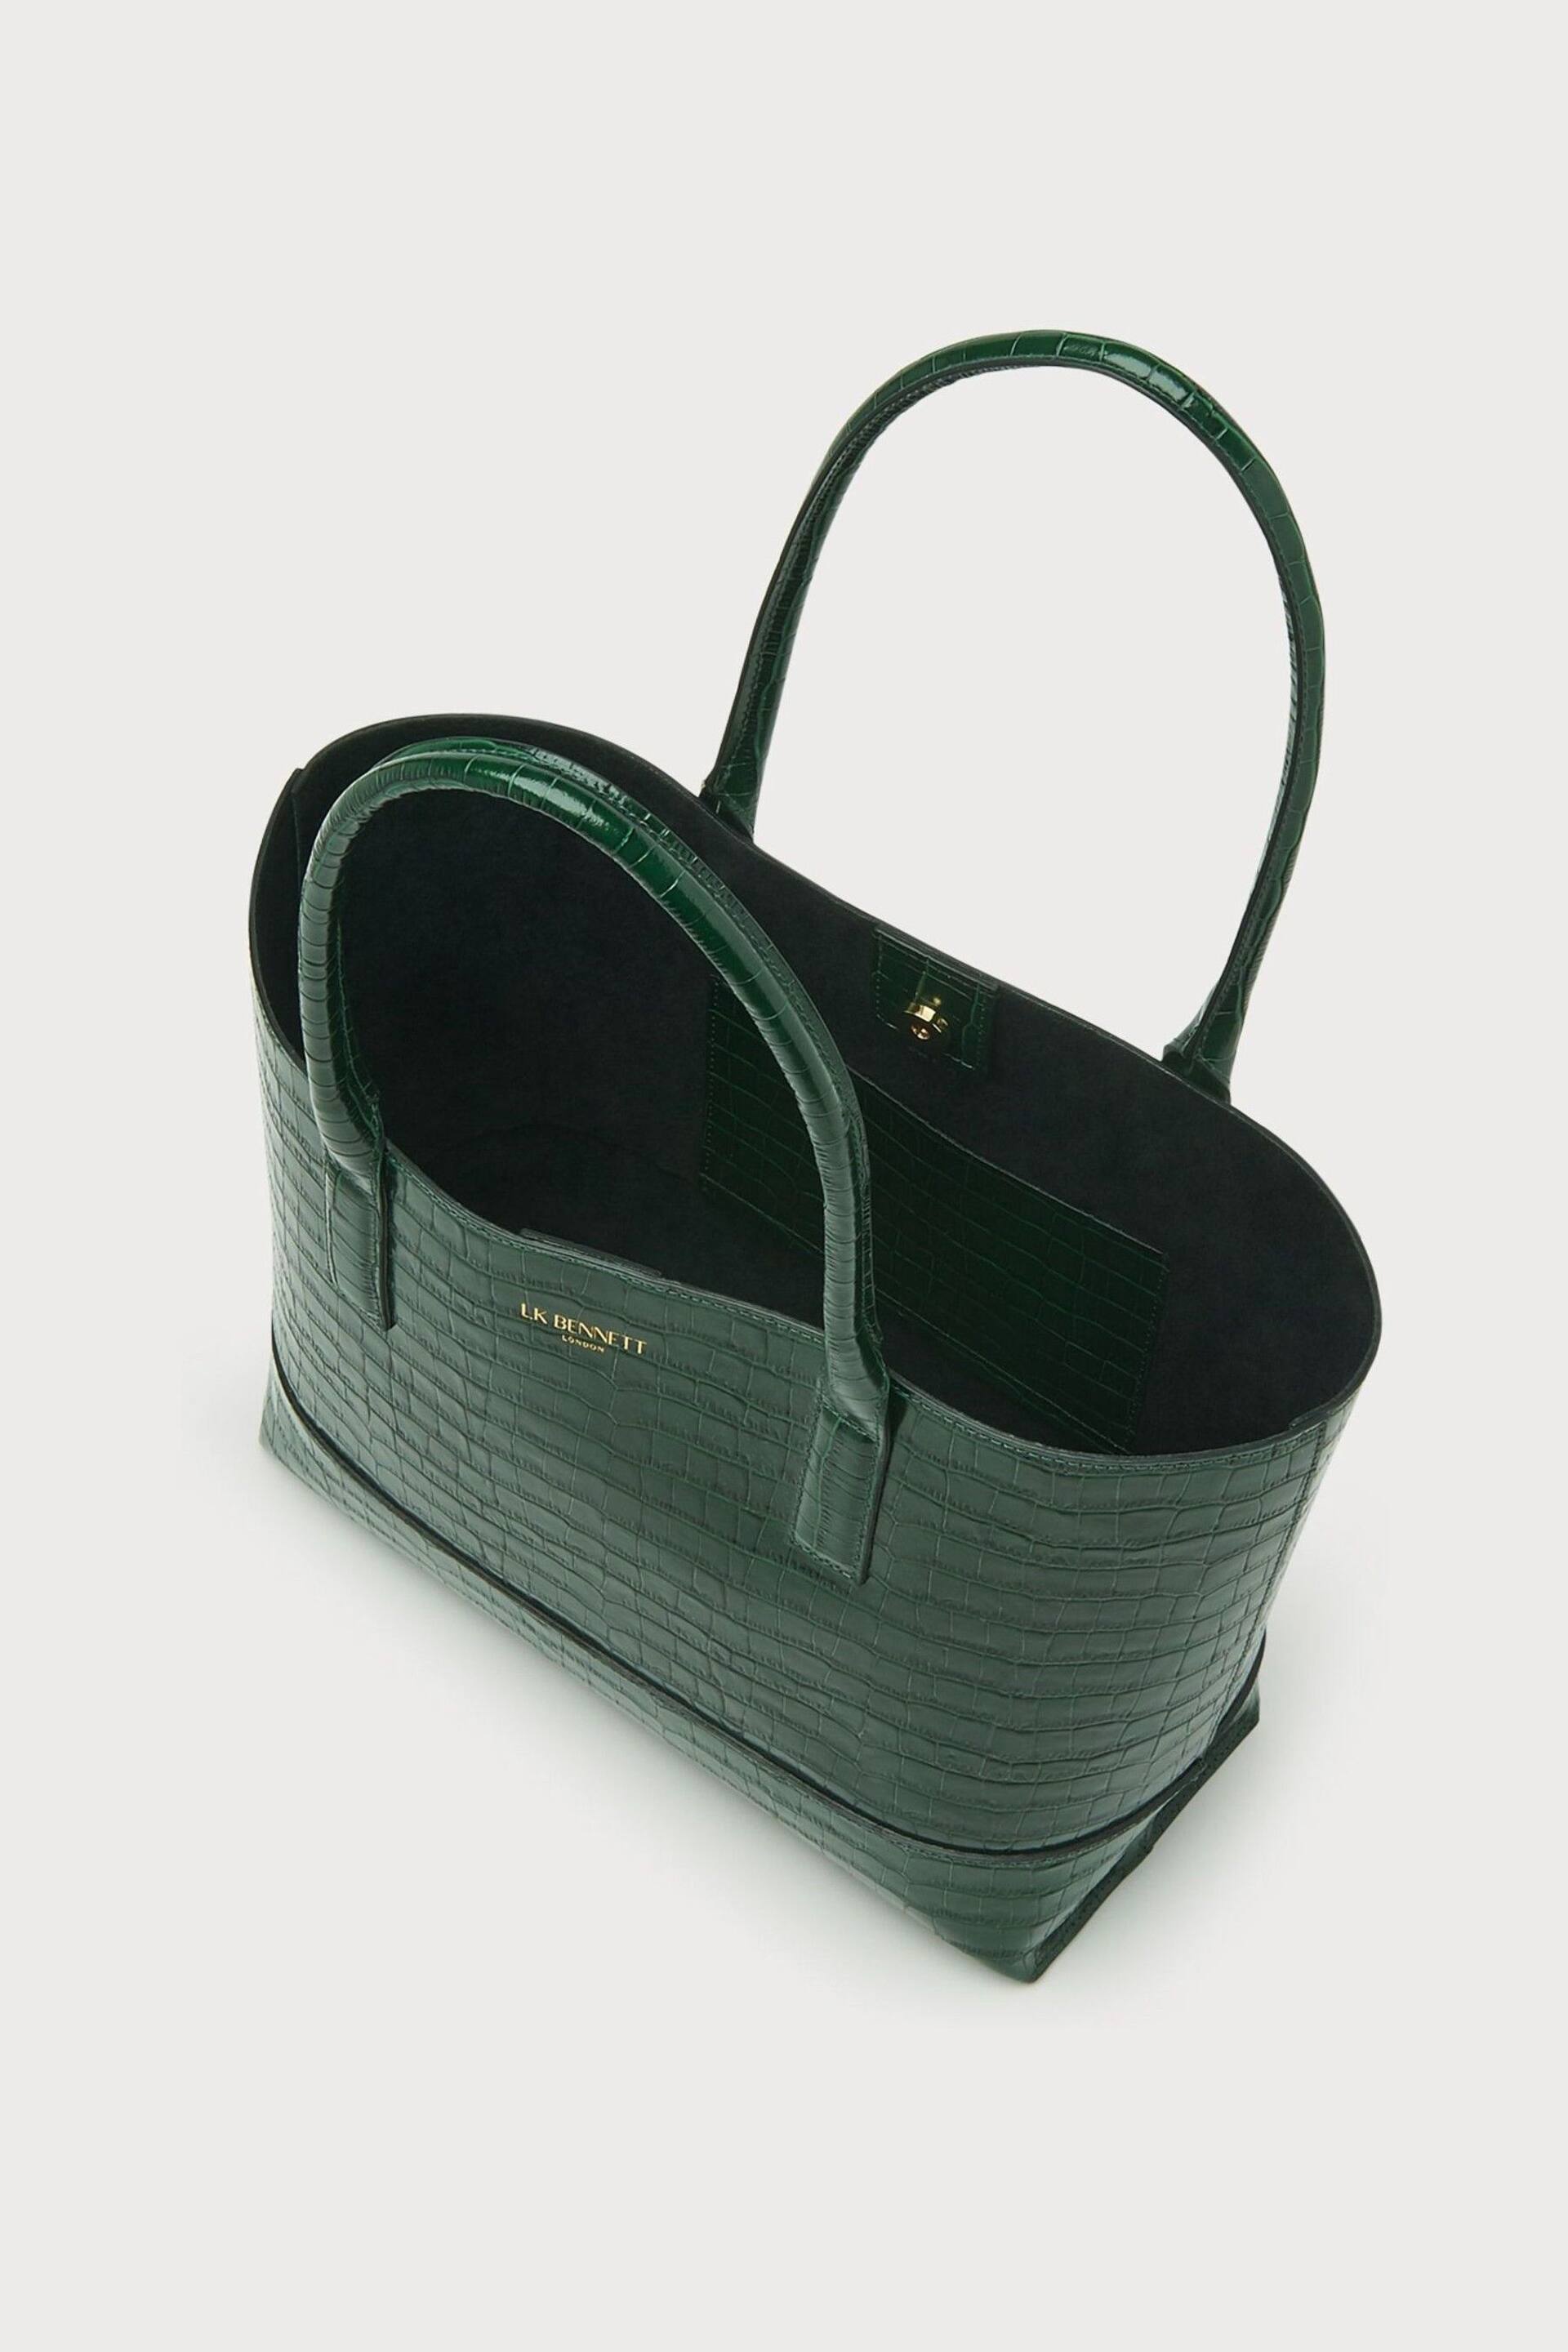 LK Bennett Lacey Simple Tote Bag - Image 3 of 3